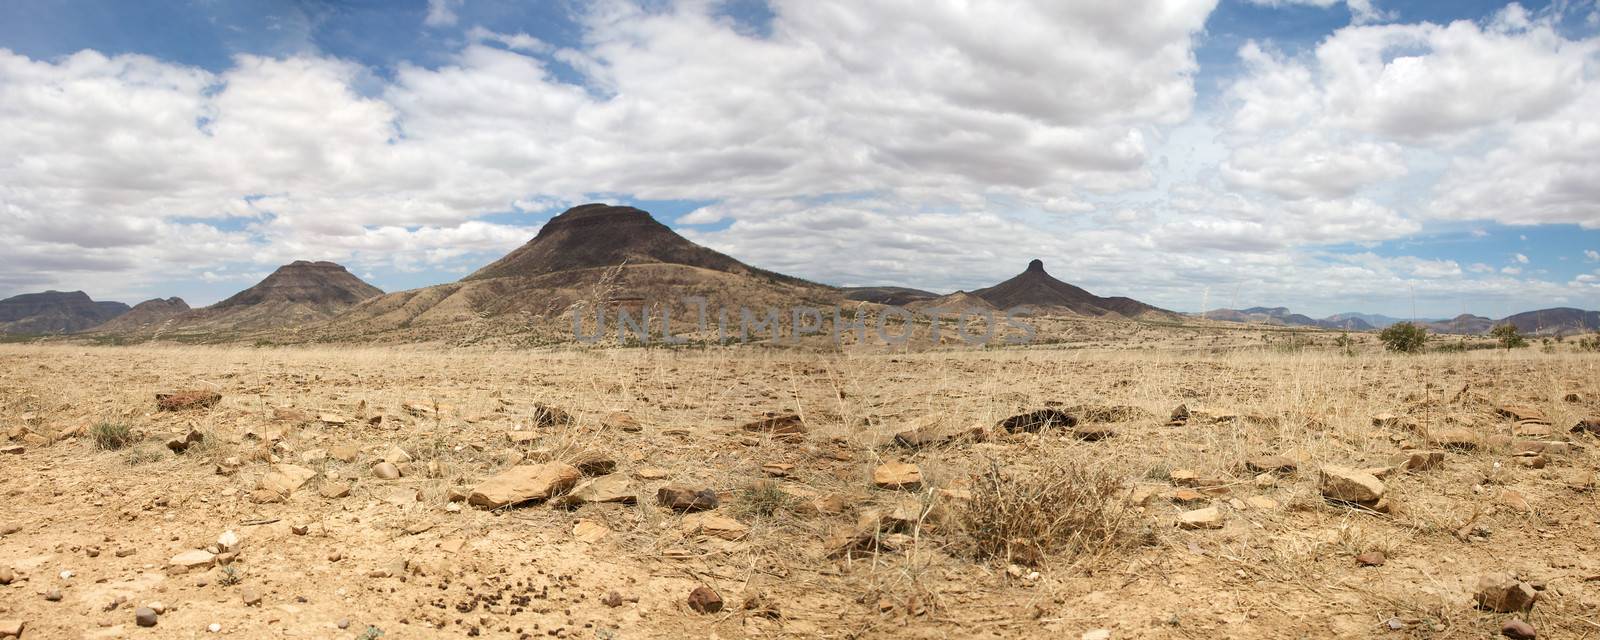 Surreal panorama of the Kaokoland game reserve in Namibia by watchtheworld